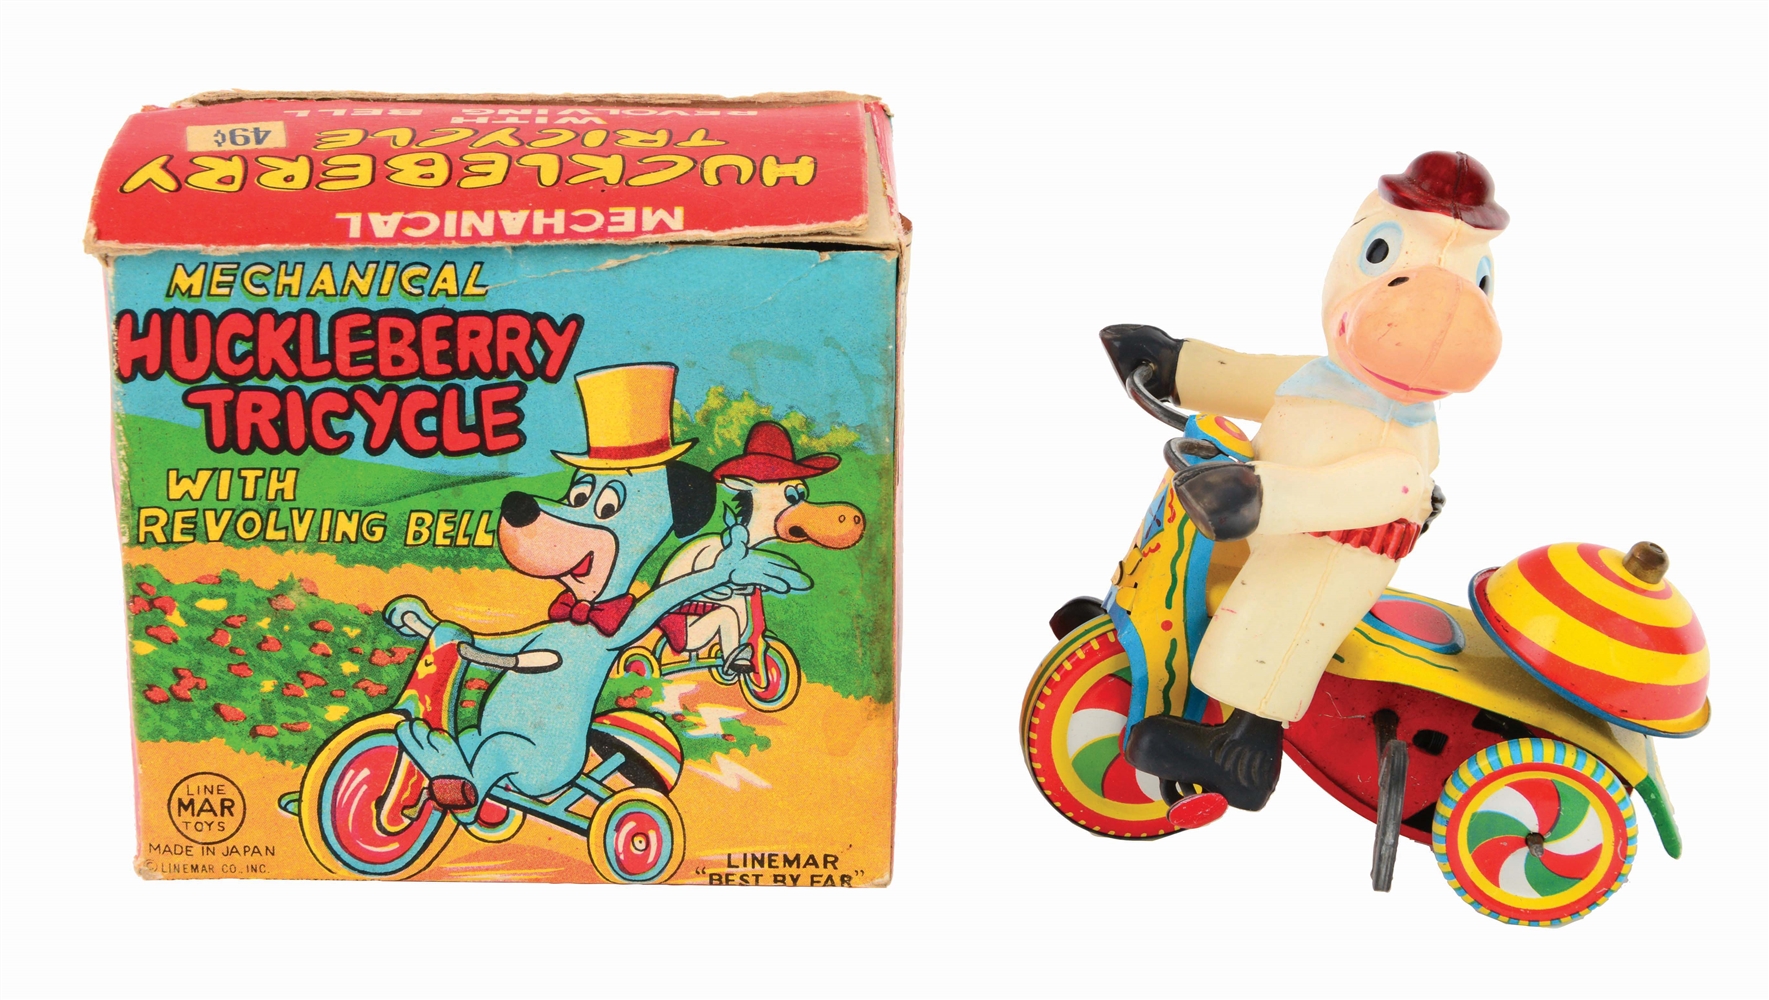 LINEMAR TIN-LITHO AND CELLULOID QUICKDRAW MCGRAW TRICYCLE TOY.